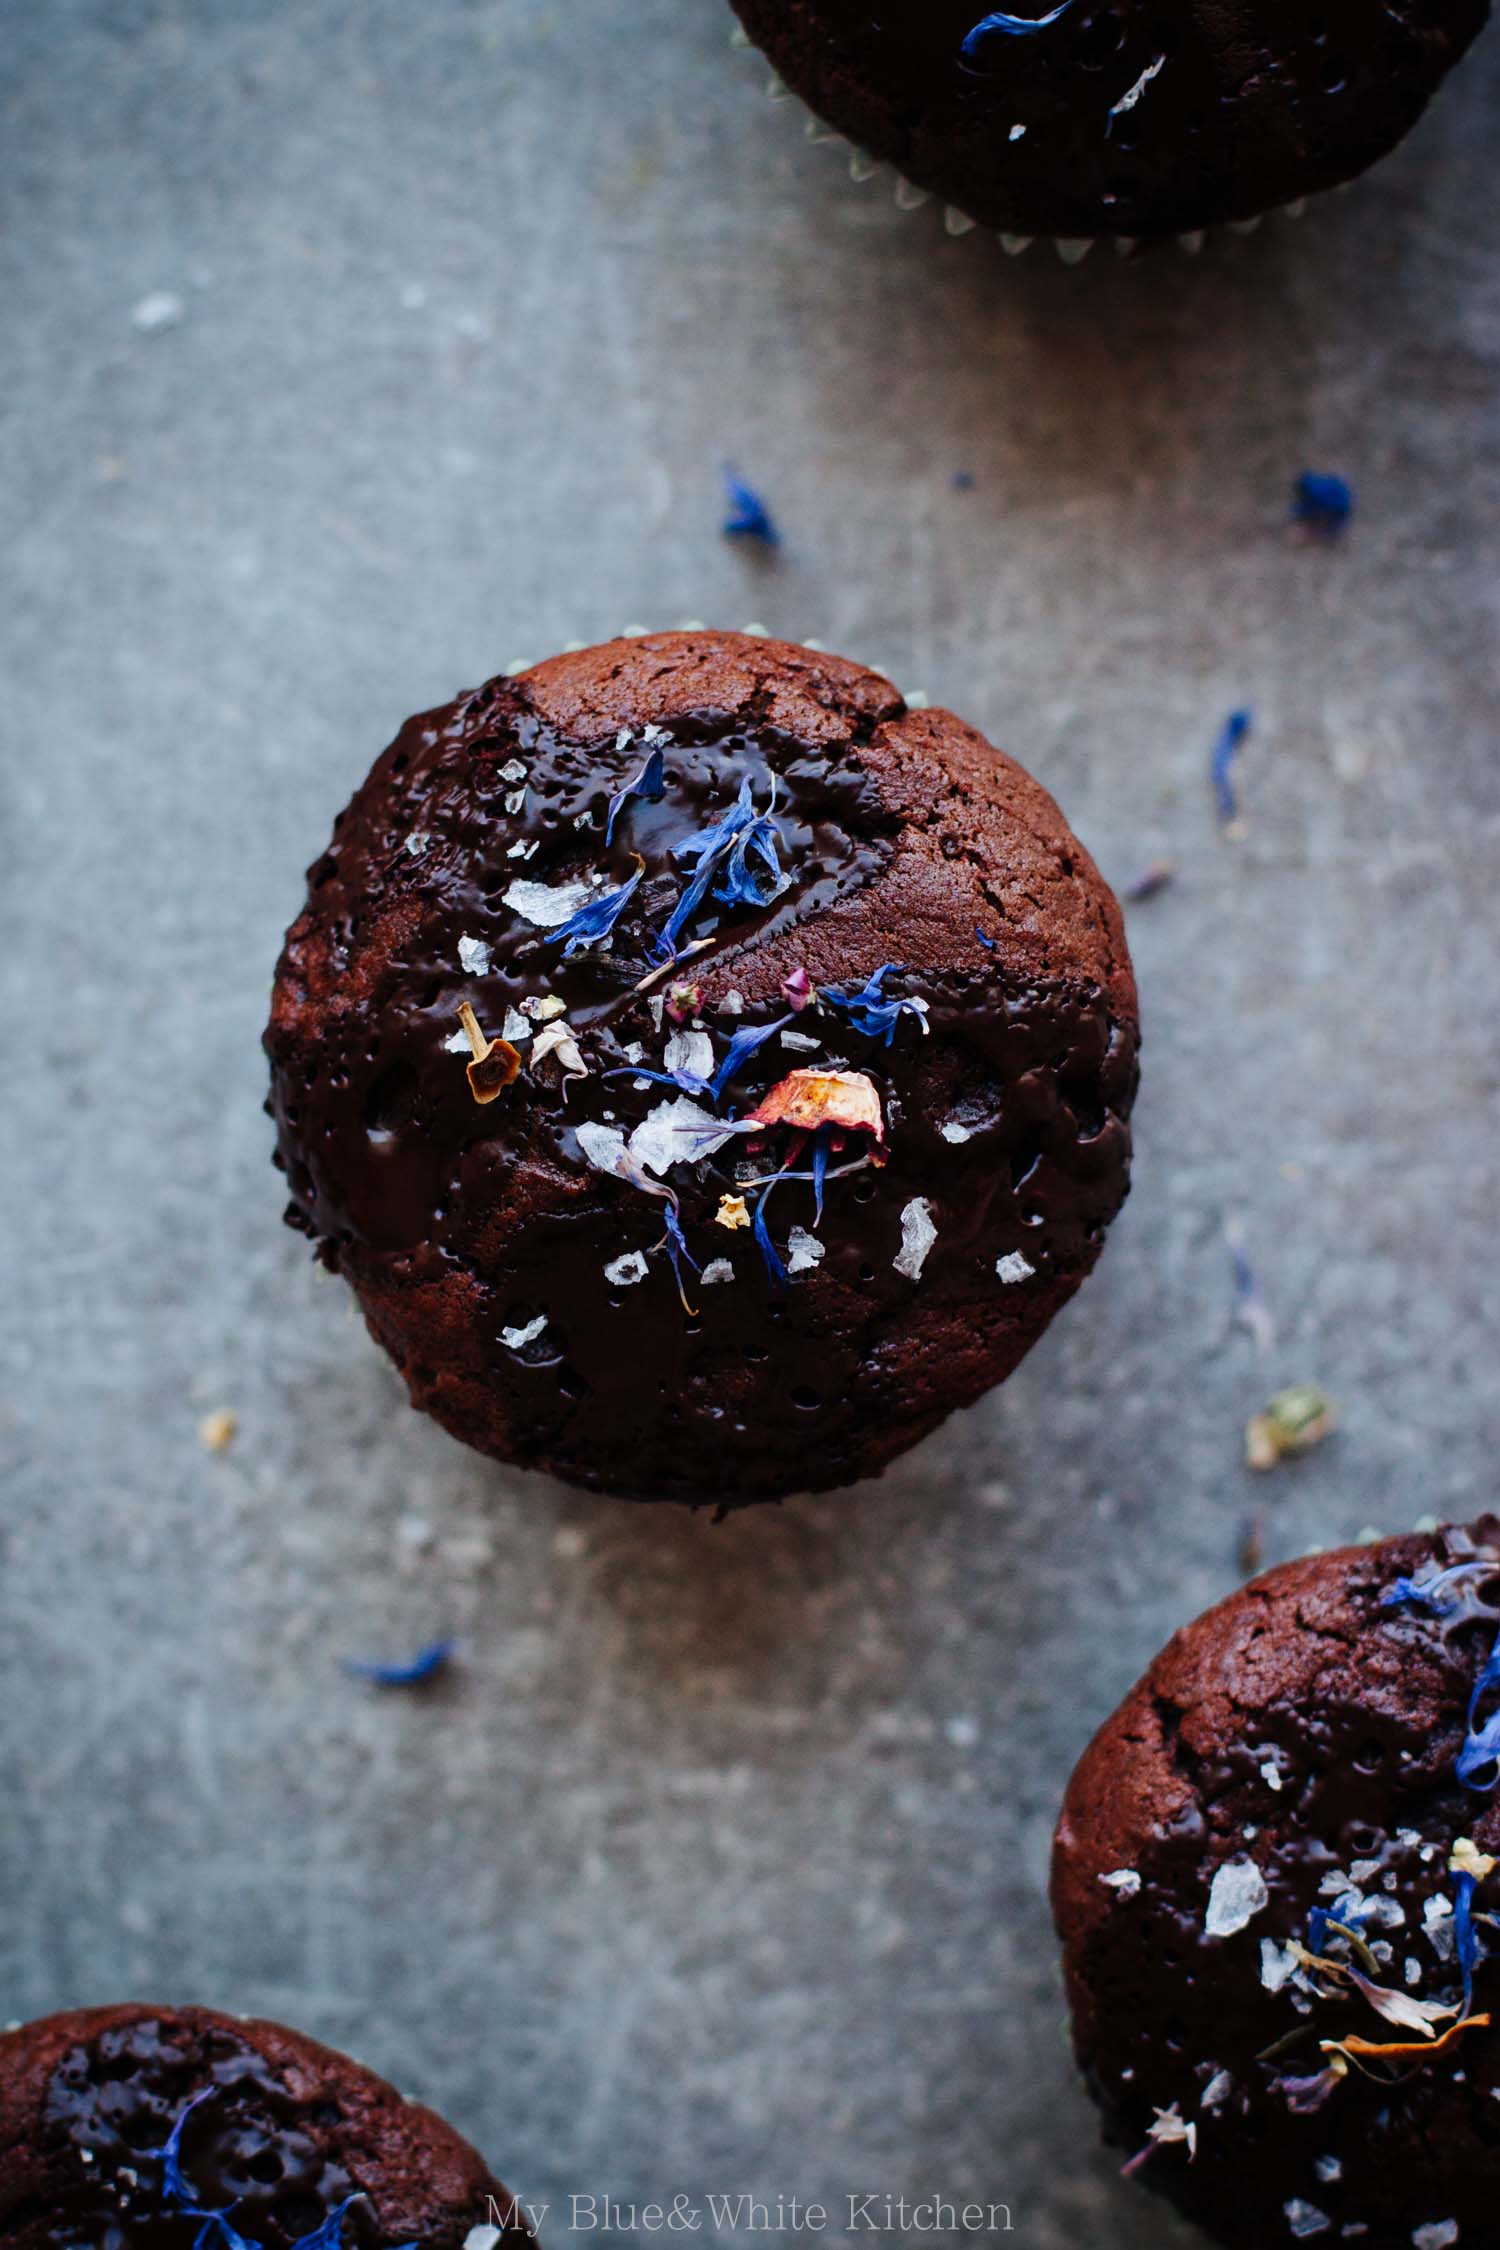 Double Chocolate Muffins with Flaked Sea Salt & Dried Flowers | My Blue&White Kitchen